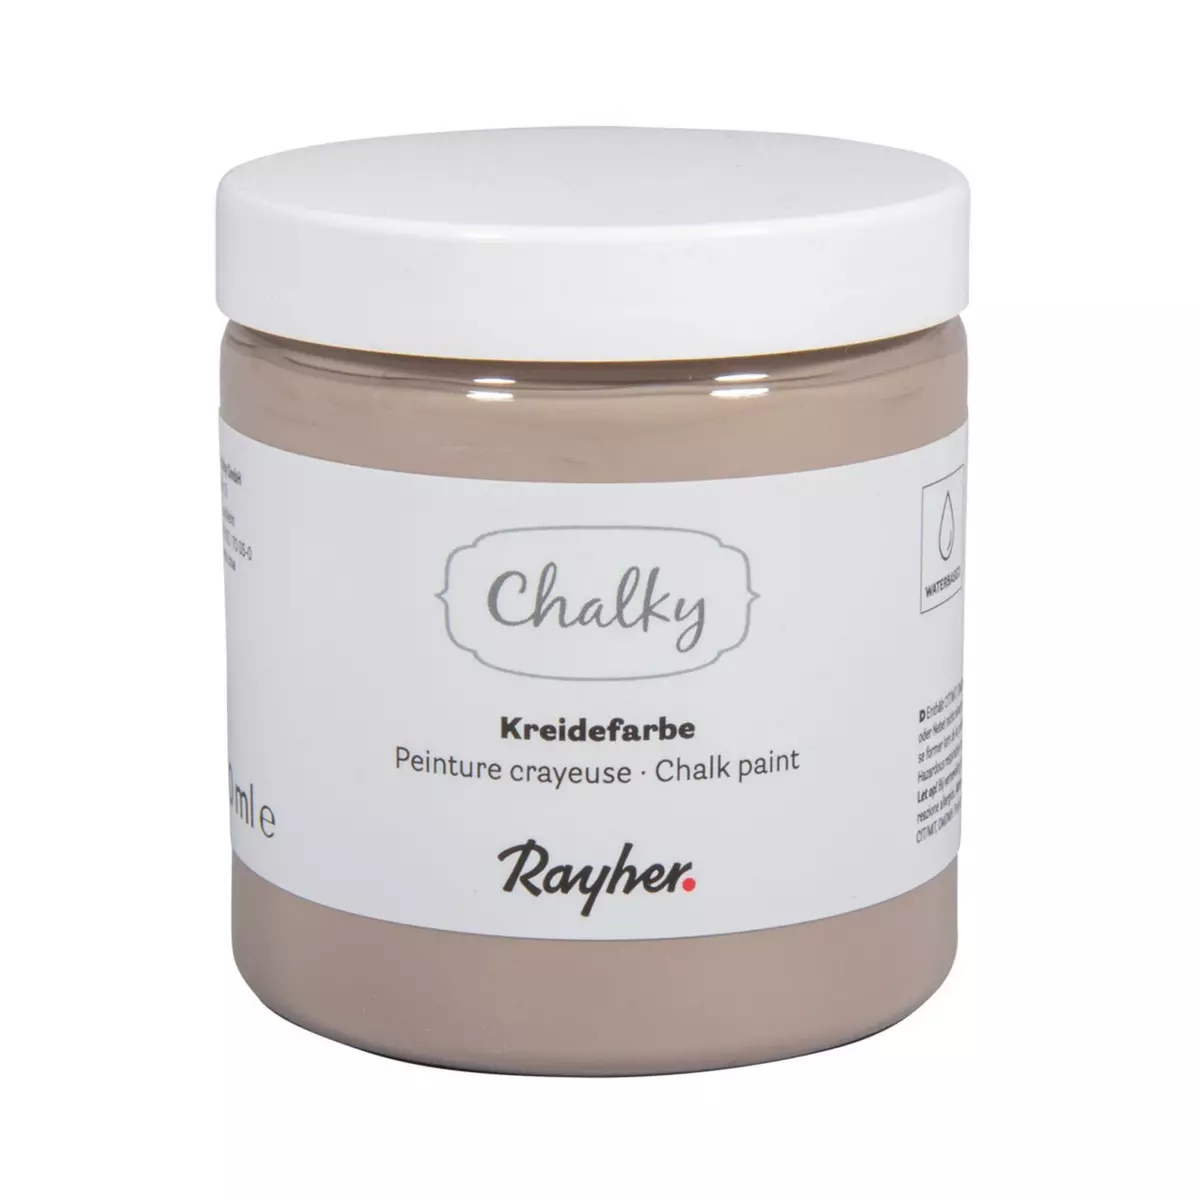 Rayher Peinture Craie Taupe - Chalky Finish - 230 ml